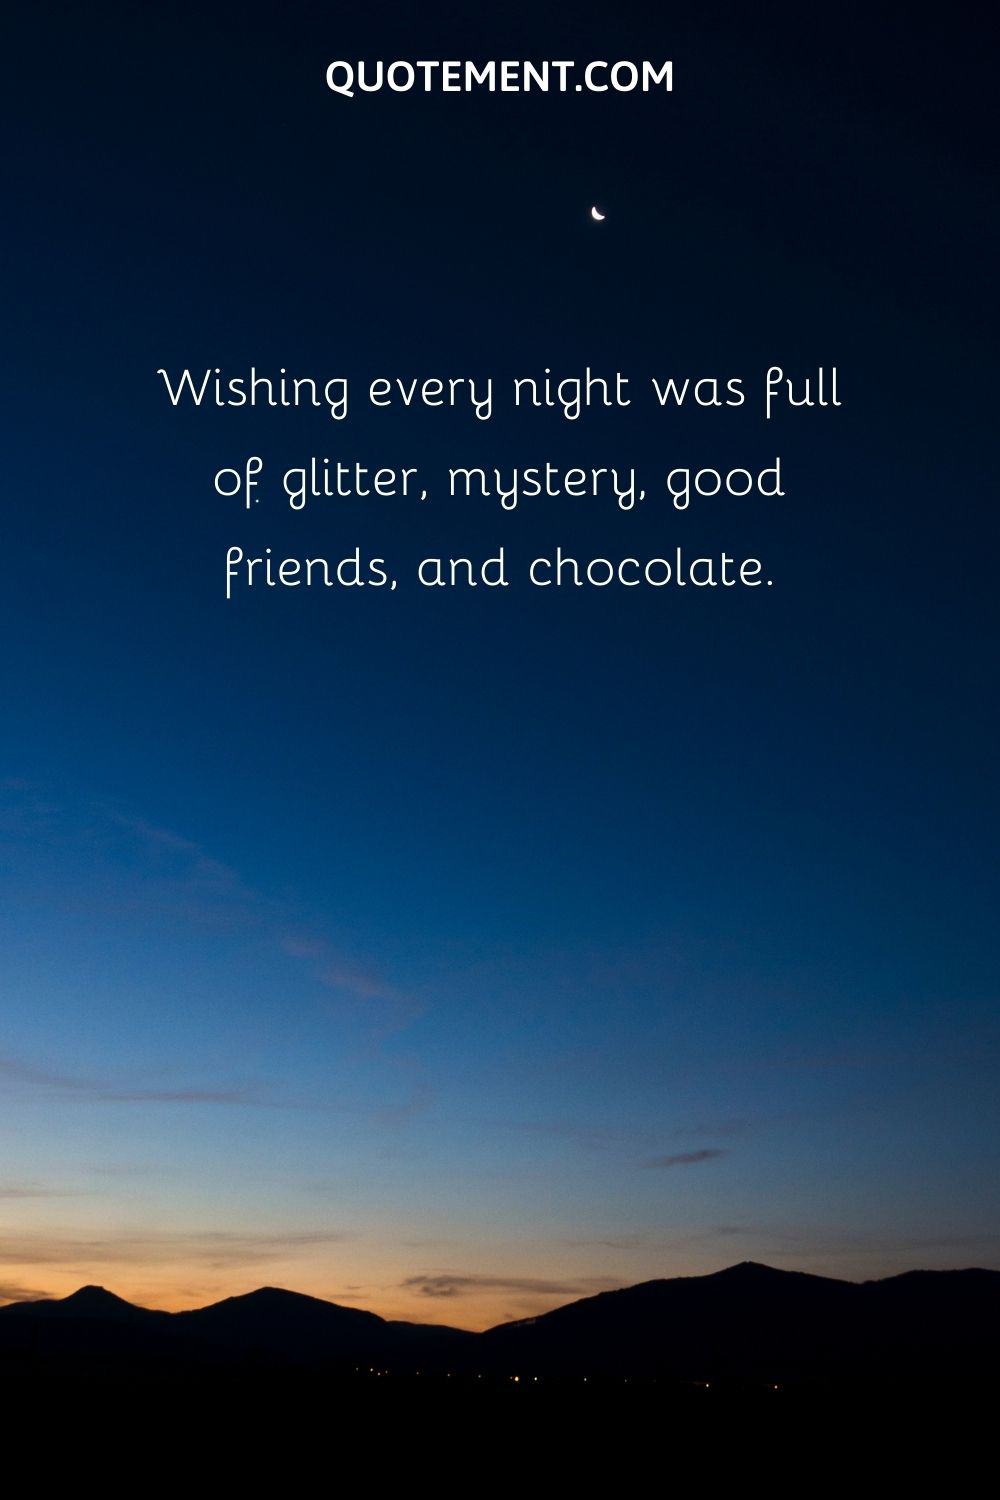 Wishing every night was full of glitter, mystery, good friends, and chocolate